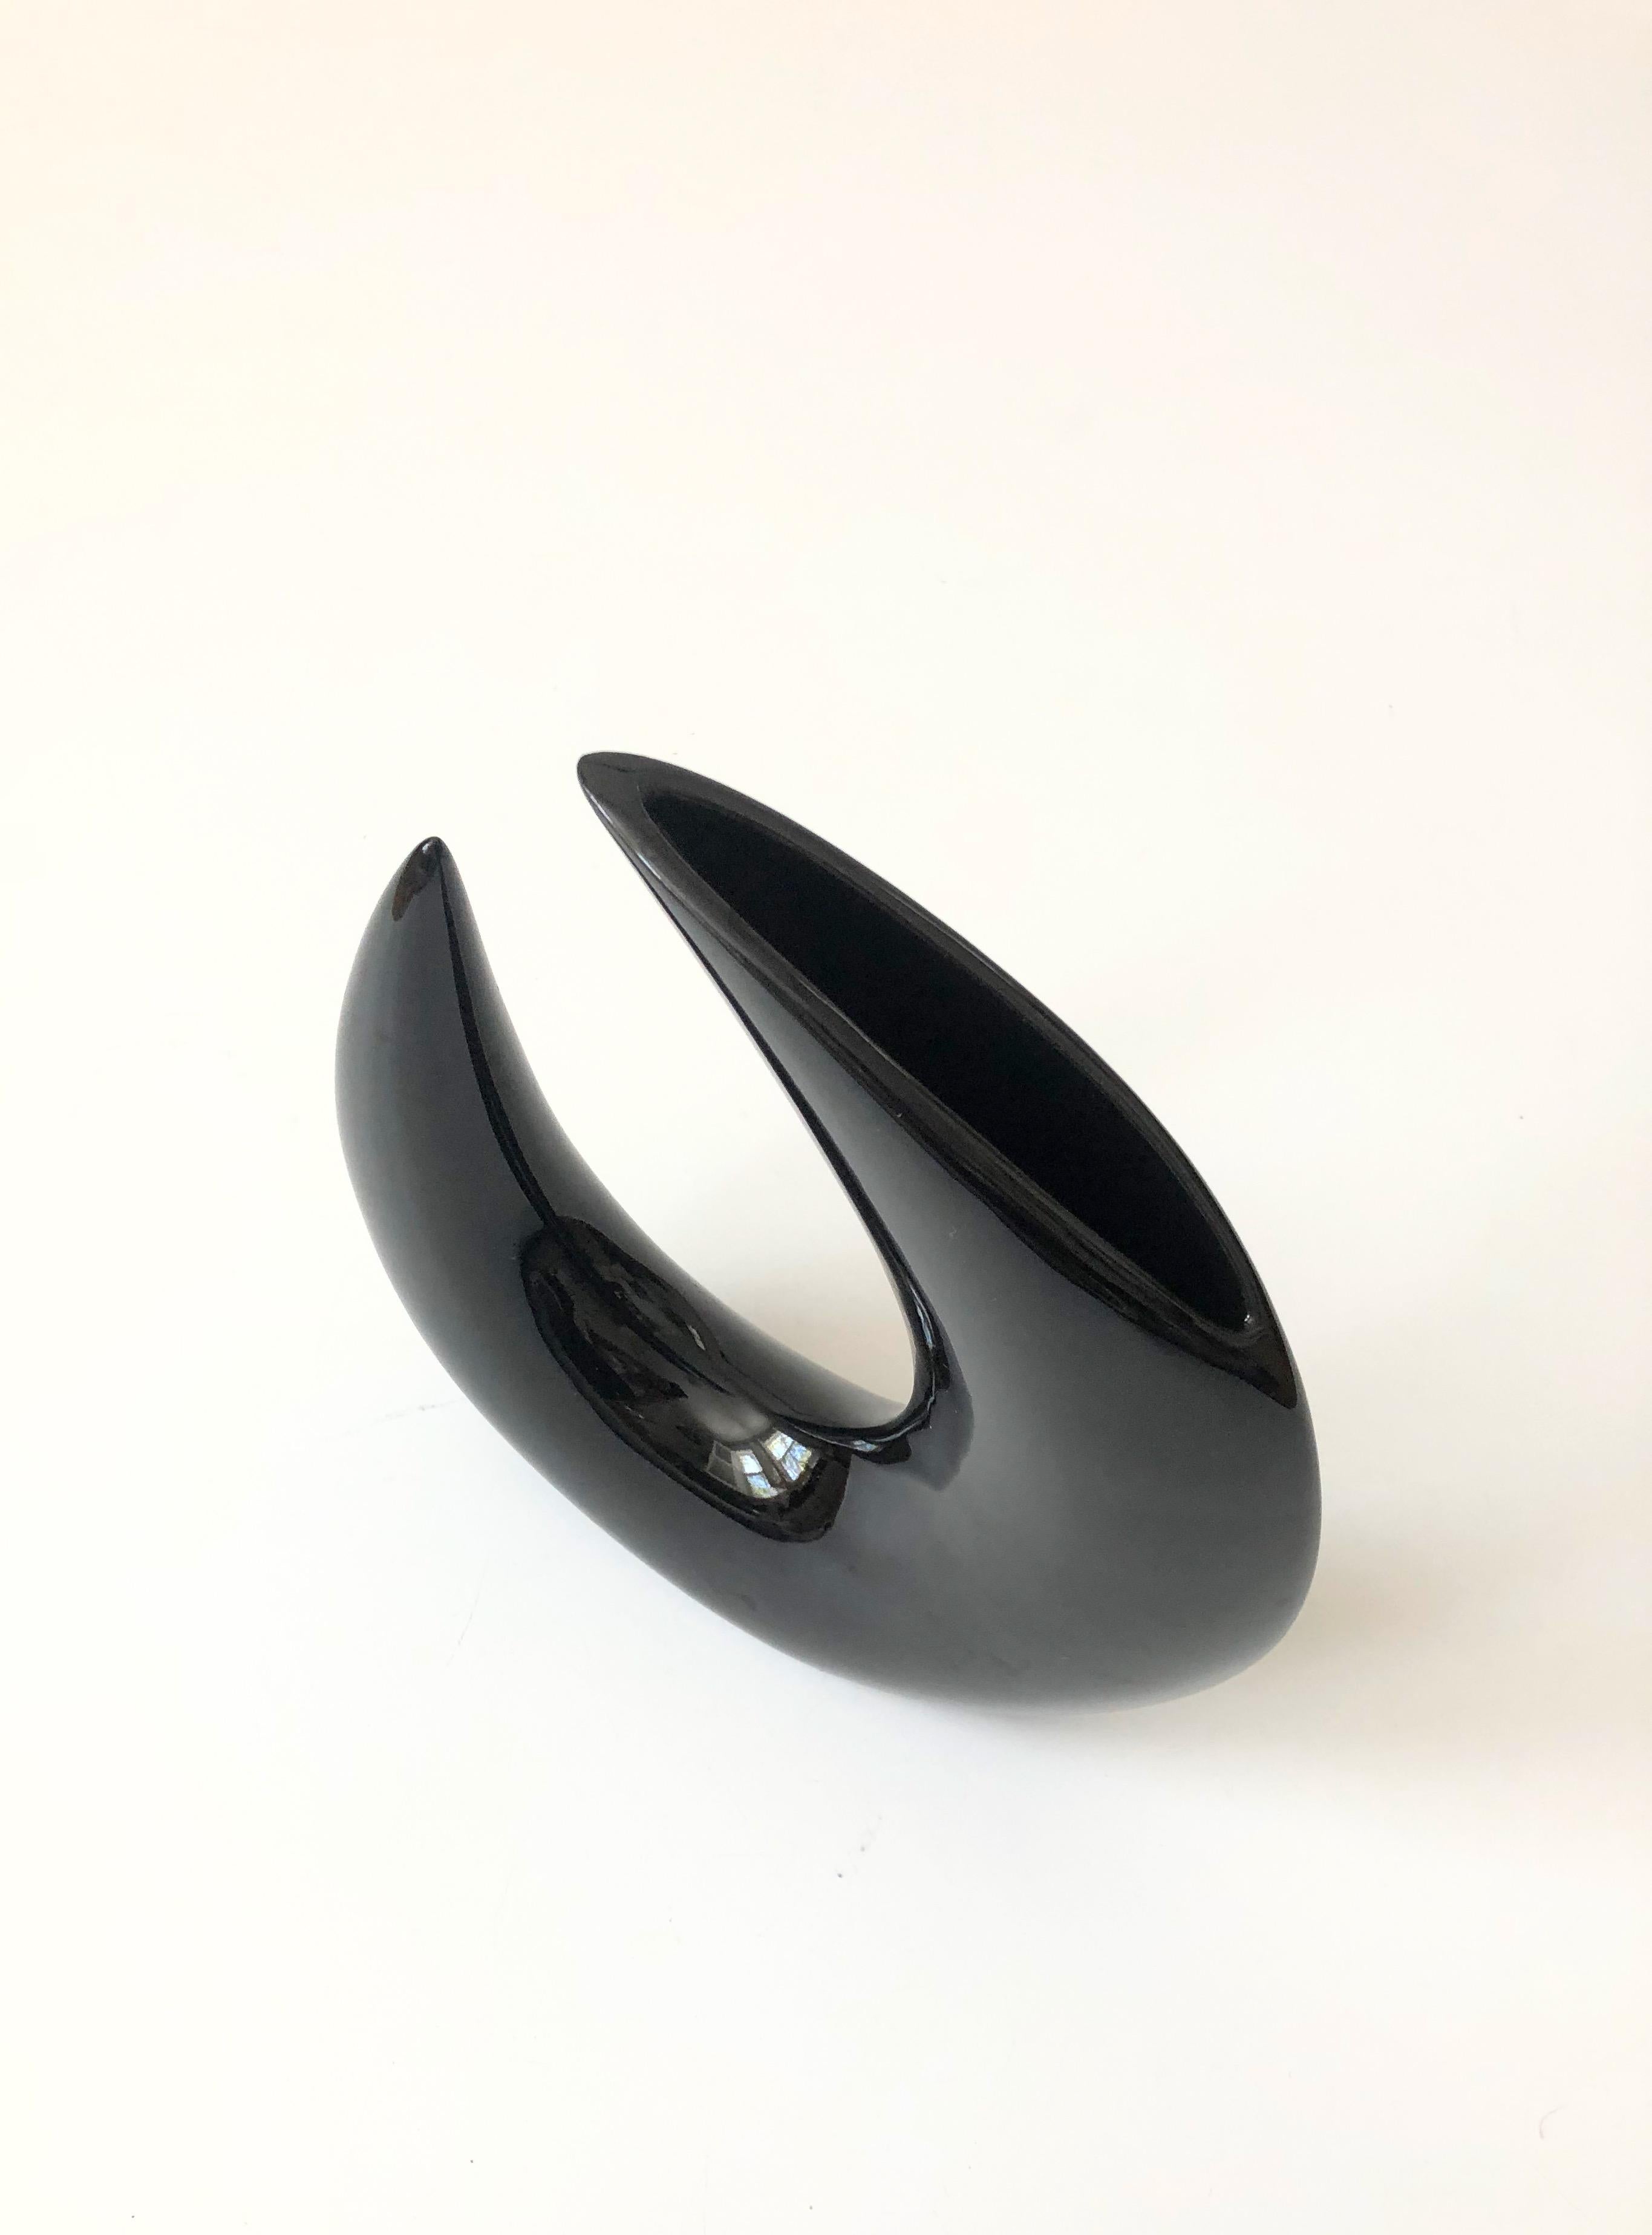 A mid-century crescent moon shaped ceramic. Finished in a glossy black glaze. A great sculptural accent piece. Made in Japan.
 